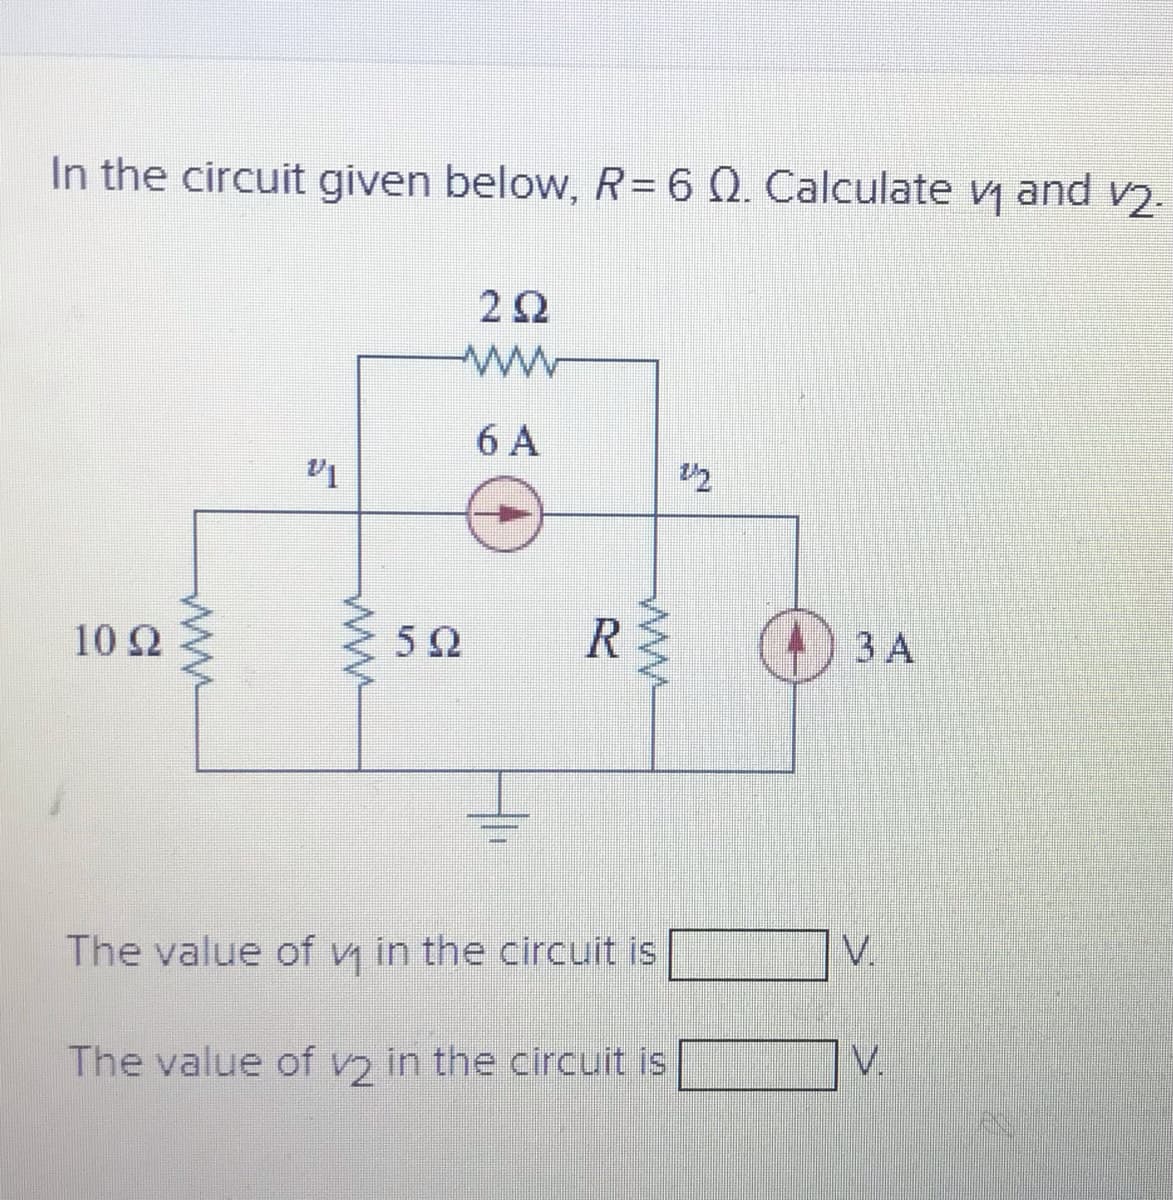 In the circuit given below, R= 6 Q. Calculate vy and v).
V2-
%3D
2Ω
6 A
10 2
5Ω
3 A
The value of vy in the circuit is
V.
The value of v) in the circuit is
V.
